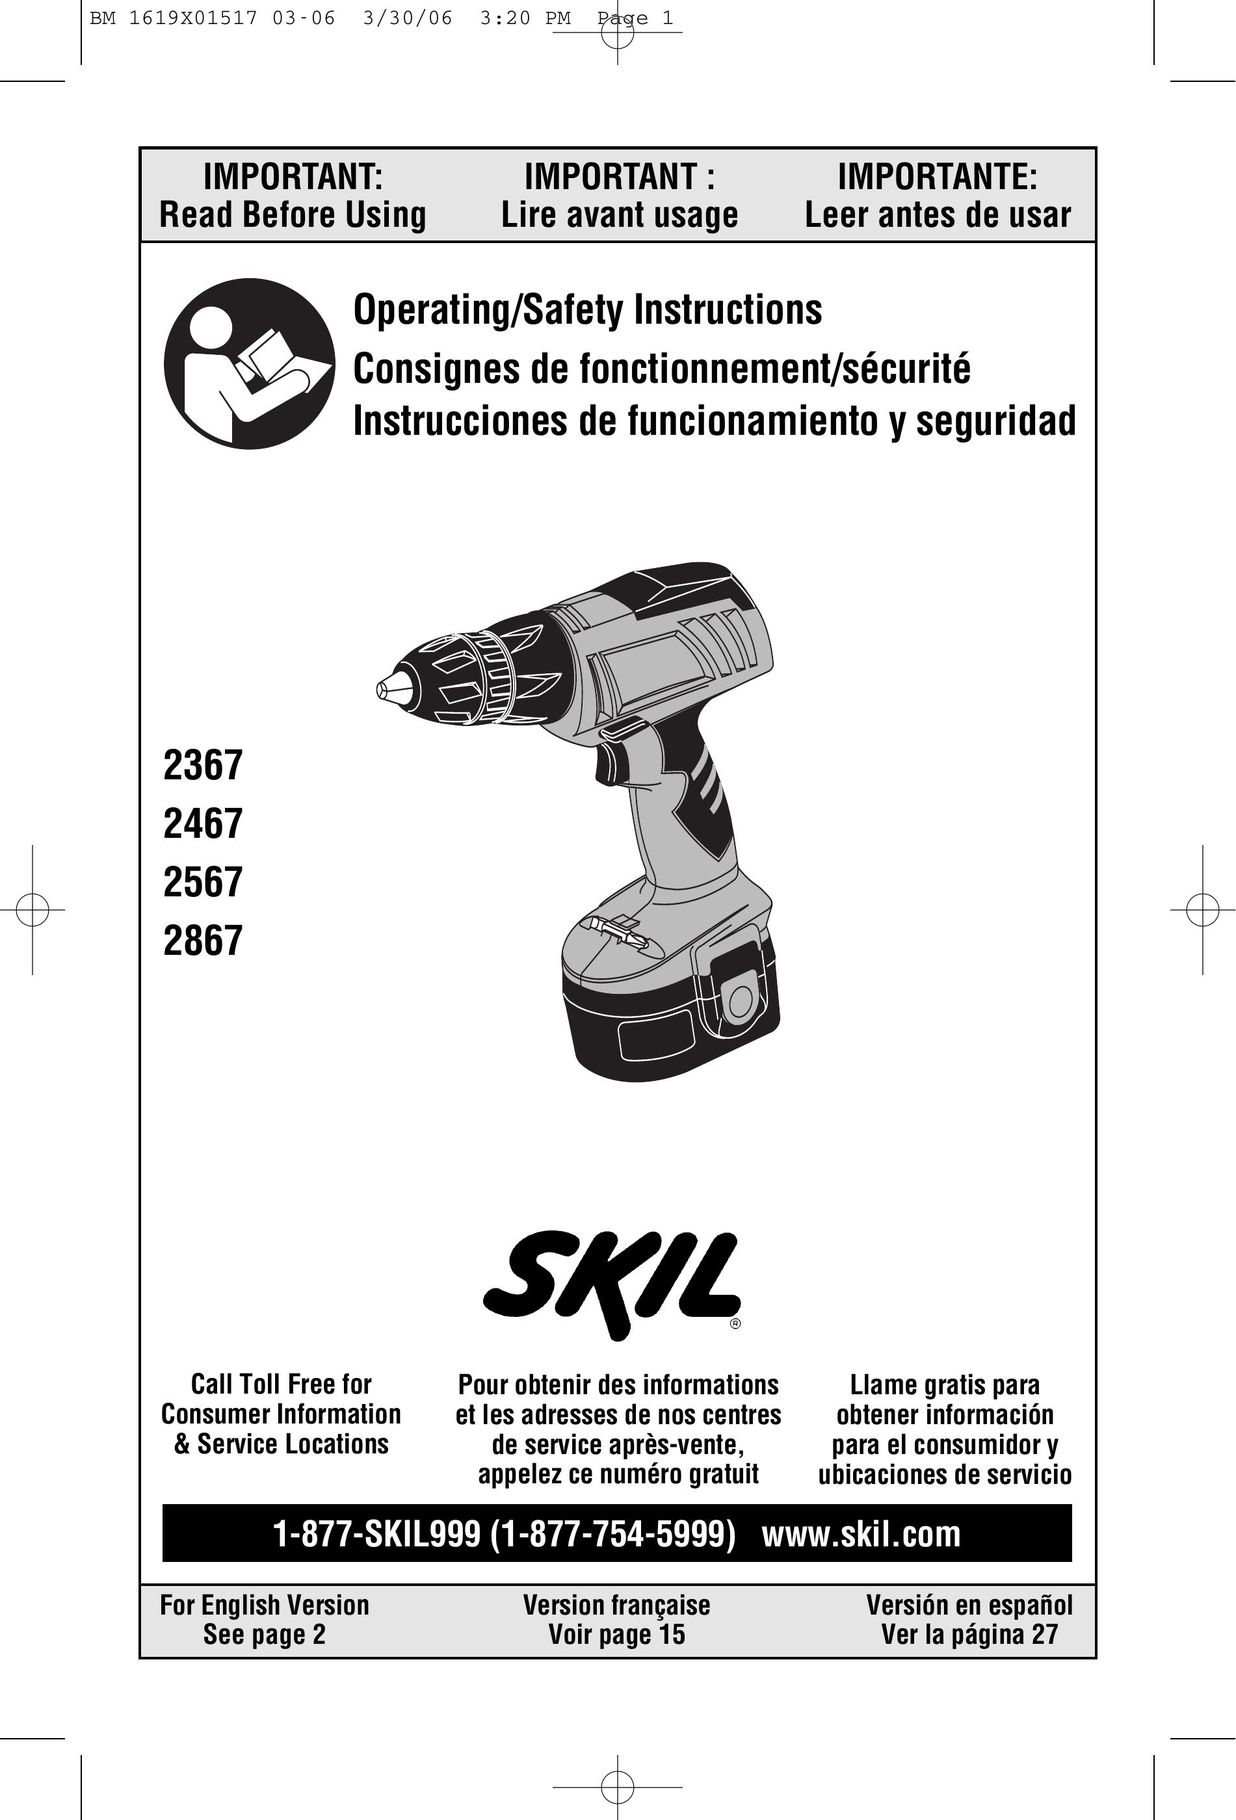 Skil 2567 Drill User Manual (Page 1)